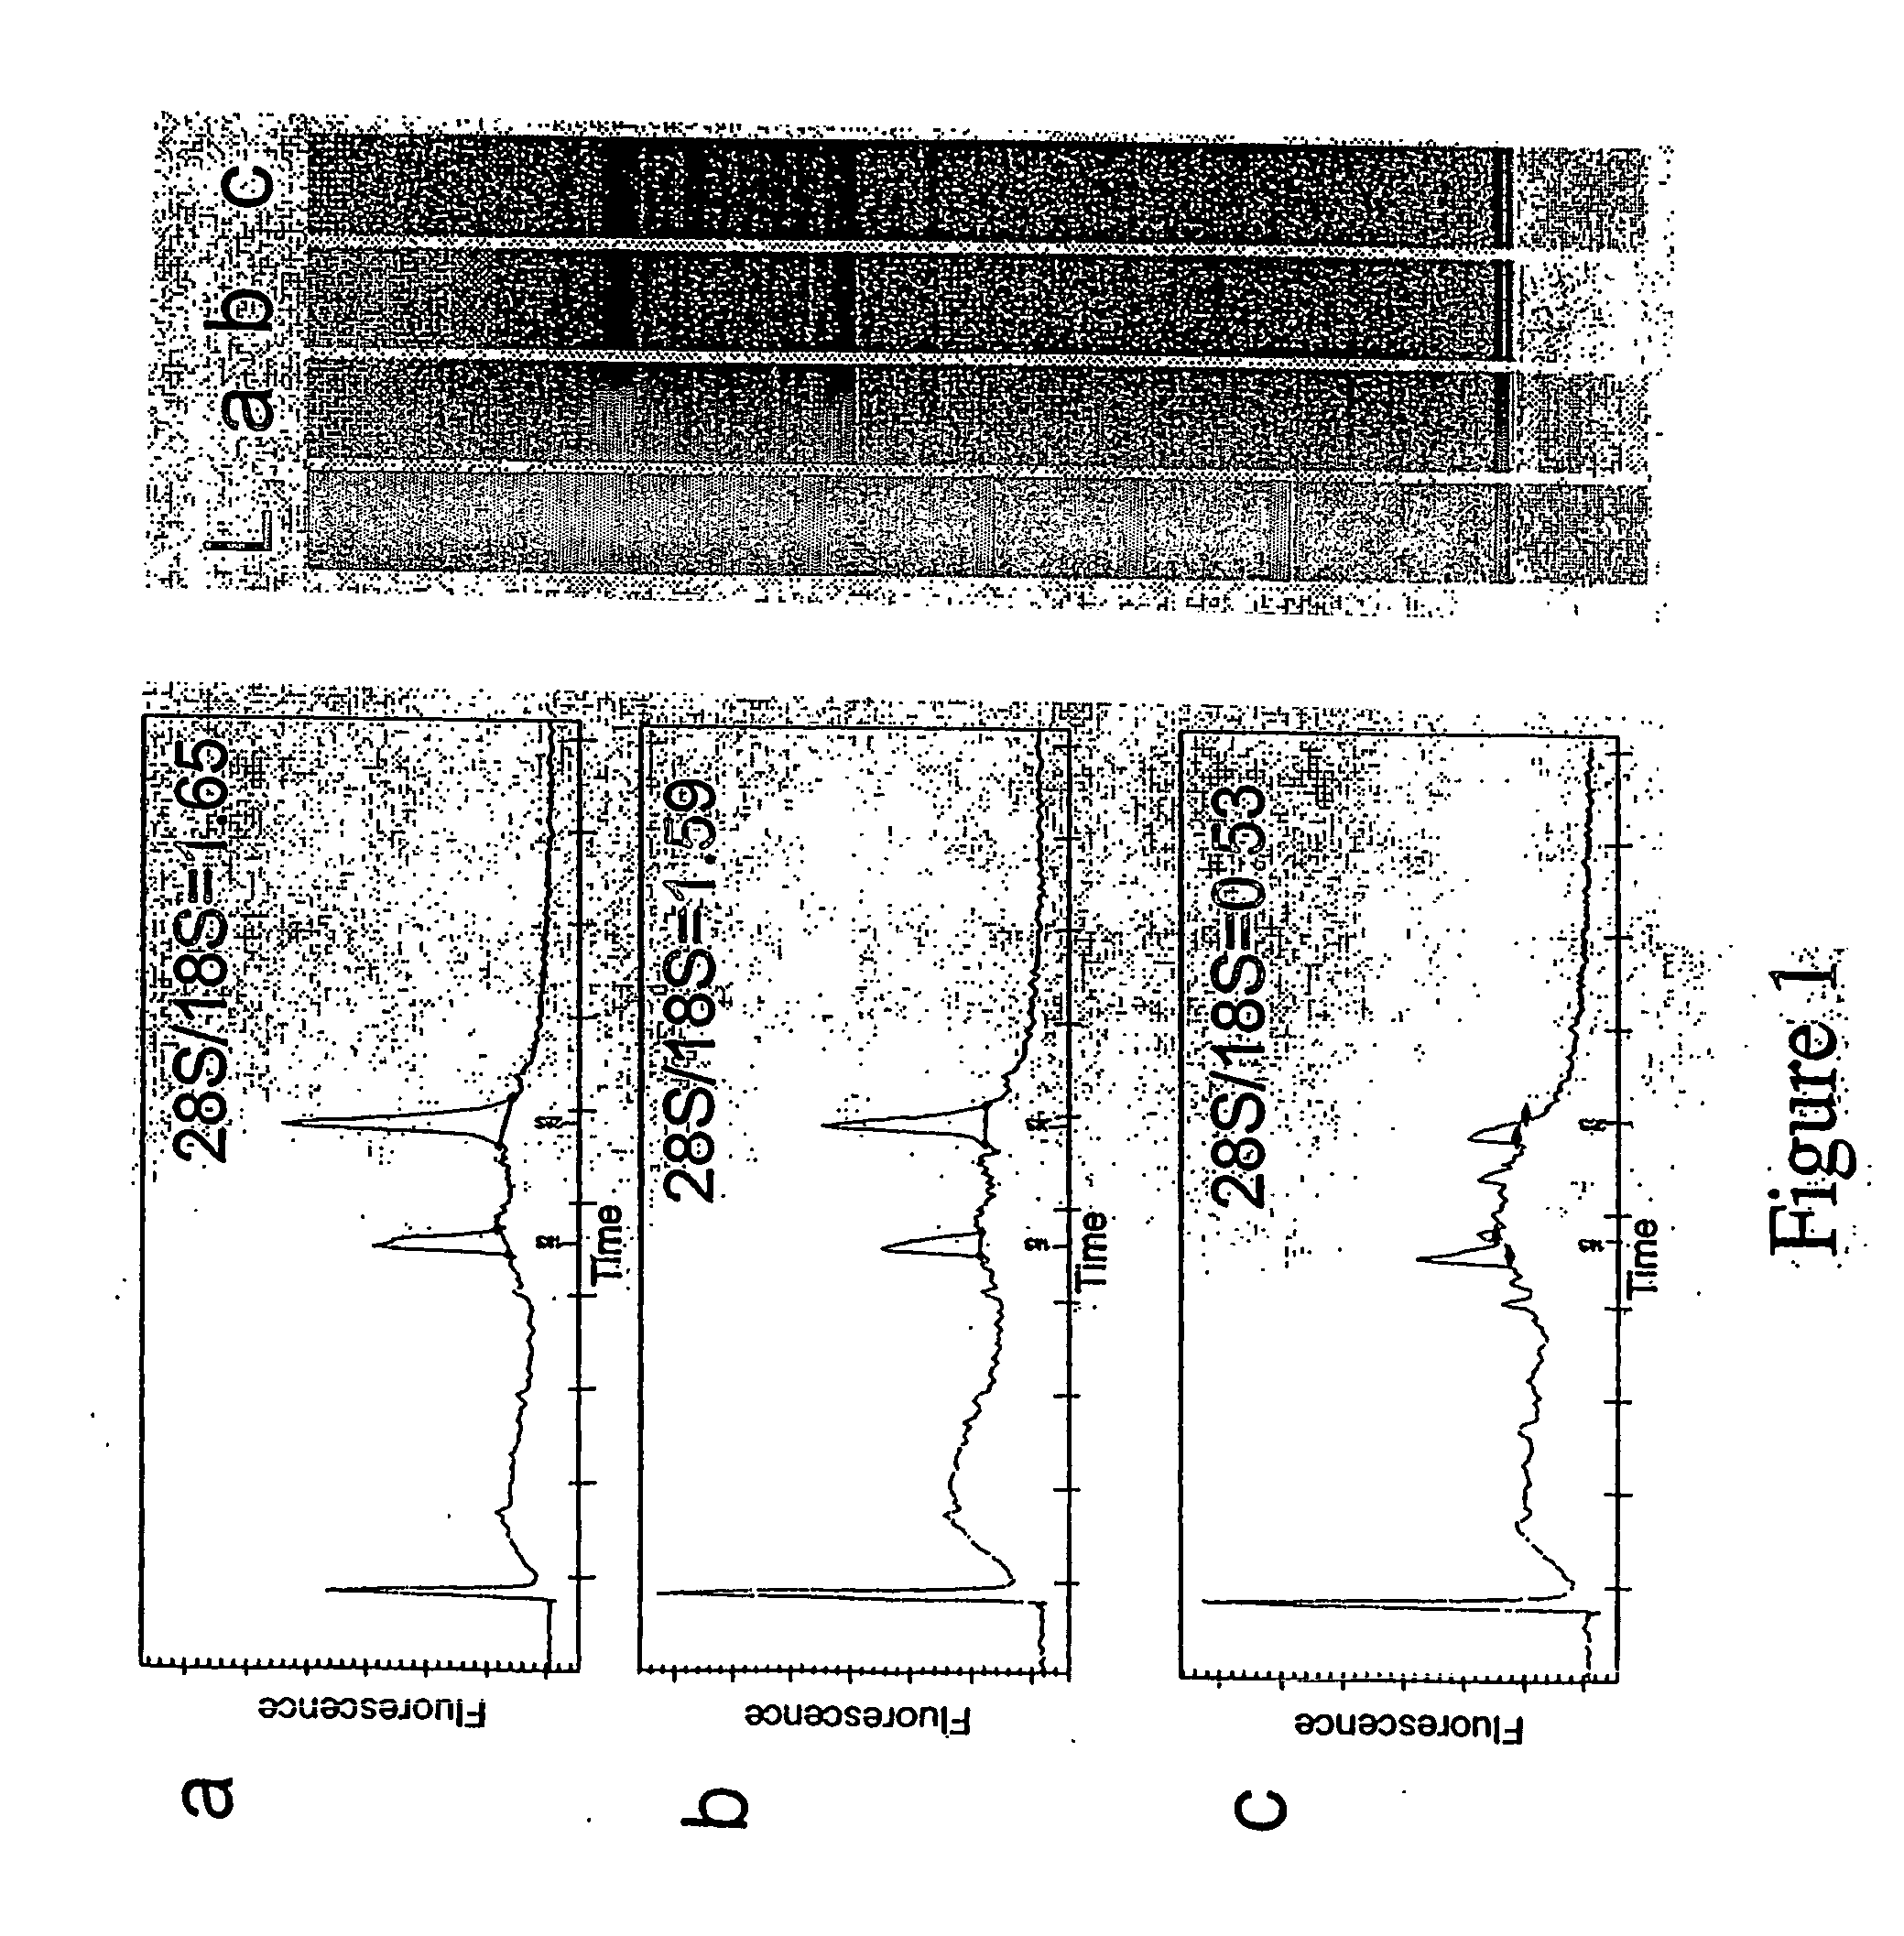 Methods For Idendifying Drug Targets And Modulators Of Neurons and Compositions Comprising The Same